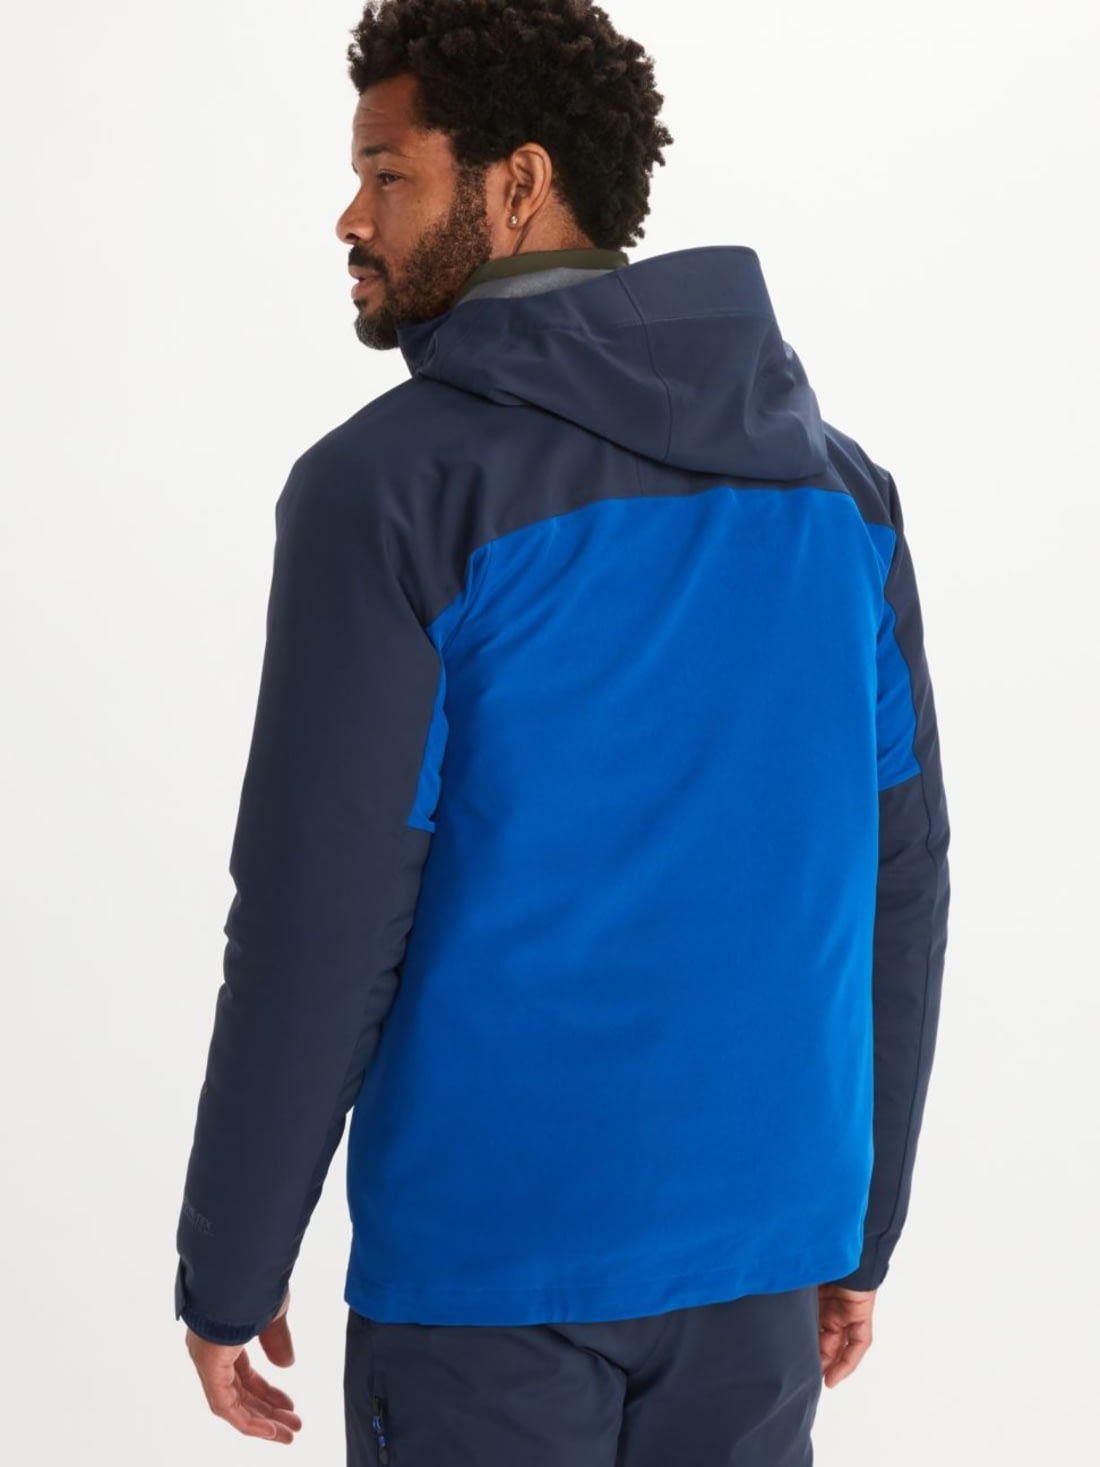 Streng doos Barry funcampshop - Don't Pay Full Price for Store Marmot ROM GORE-TEX Infinium  Hoody - Men's - Save up to 50%